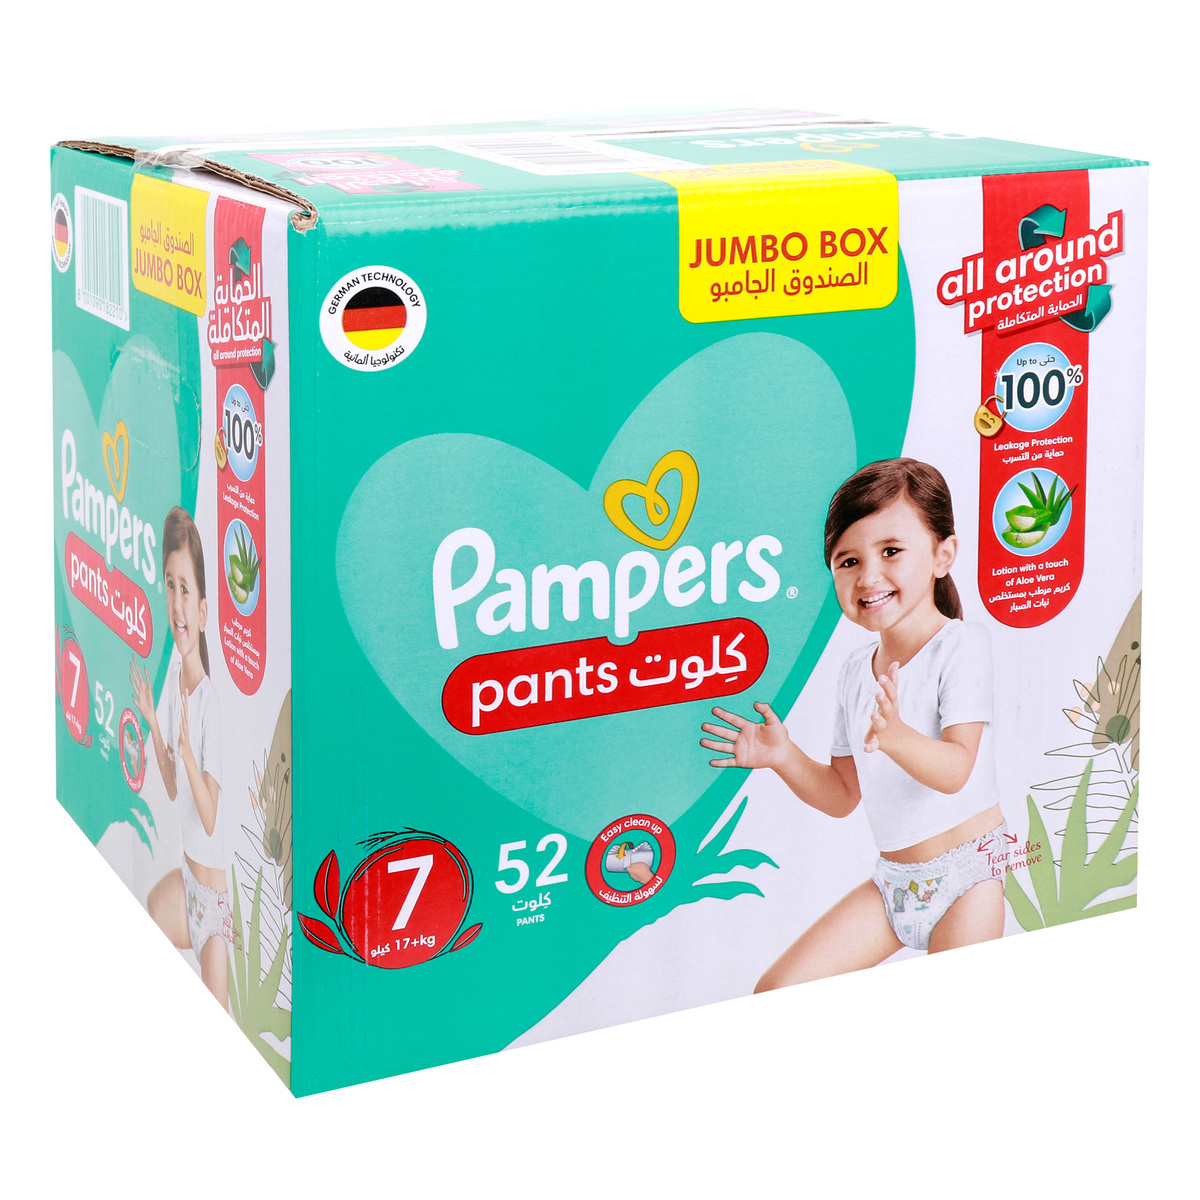 Pampers Baby-Dry Pants with Aloe Vera Lotion, Stretchy Sides, and Leakage  Protection Size 7, 17+ kg, 52pcs Online at Best Price, Baby Trainer Pants